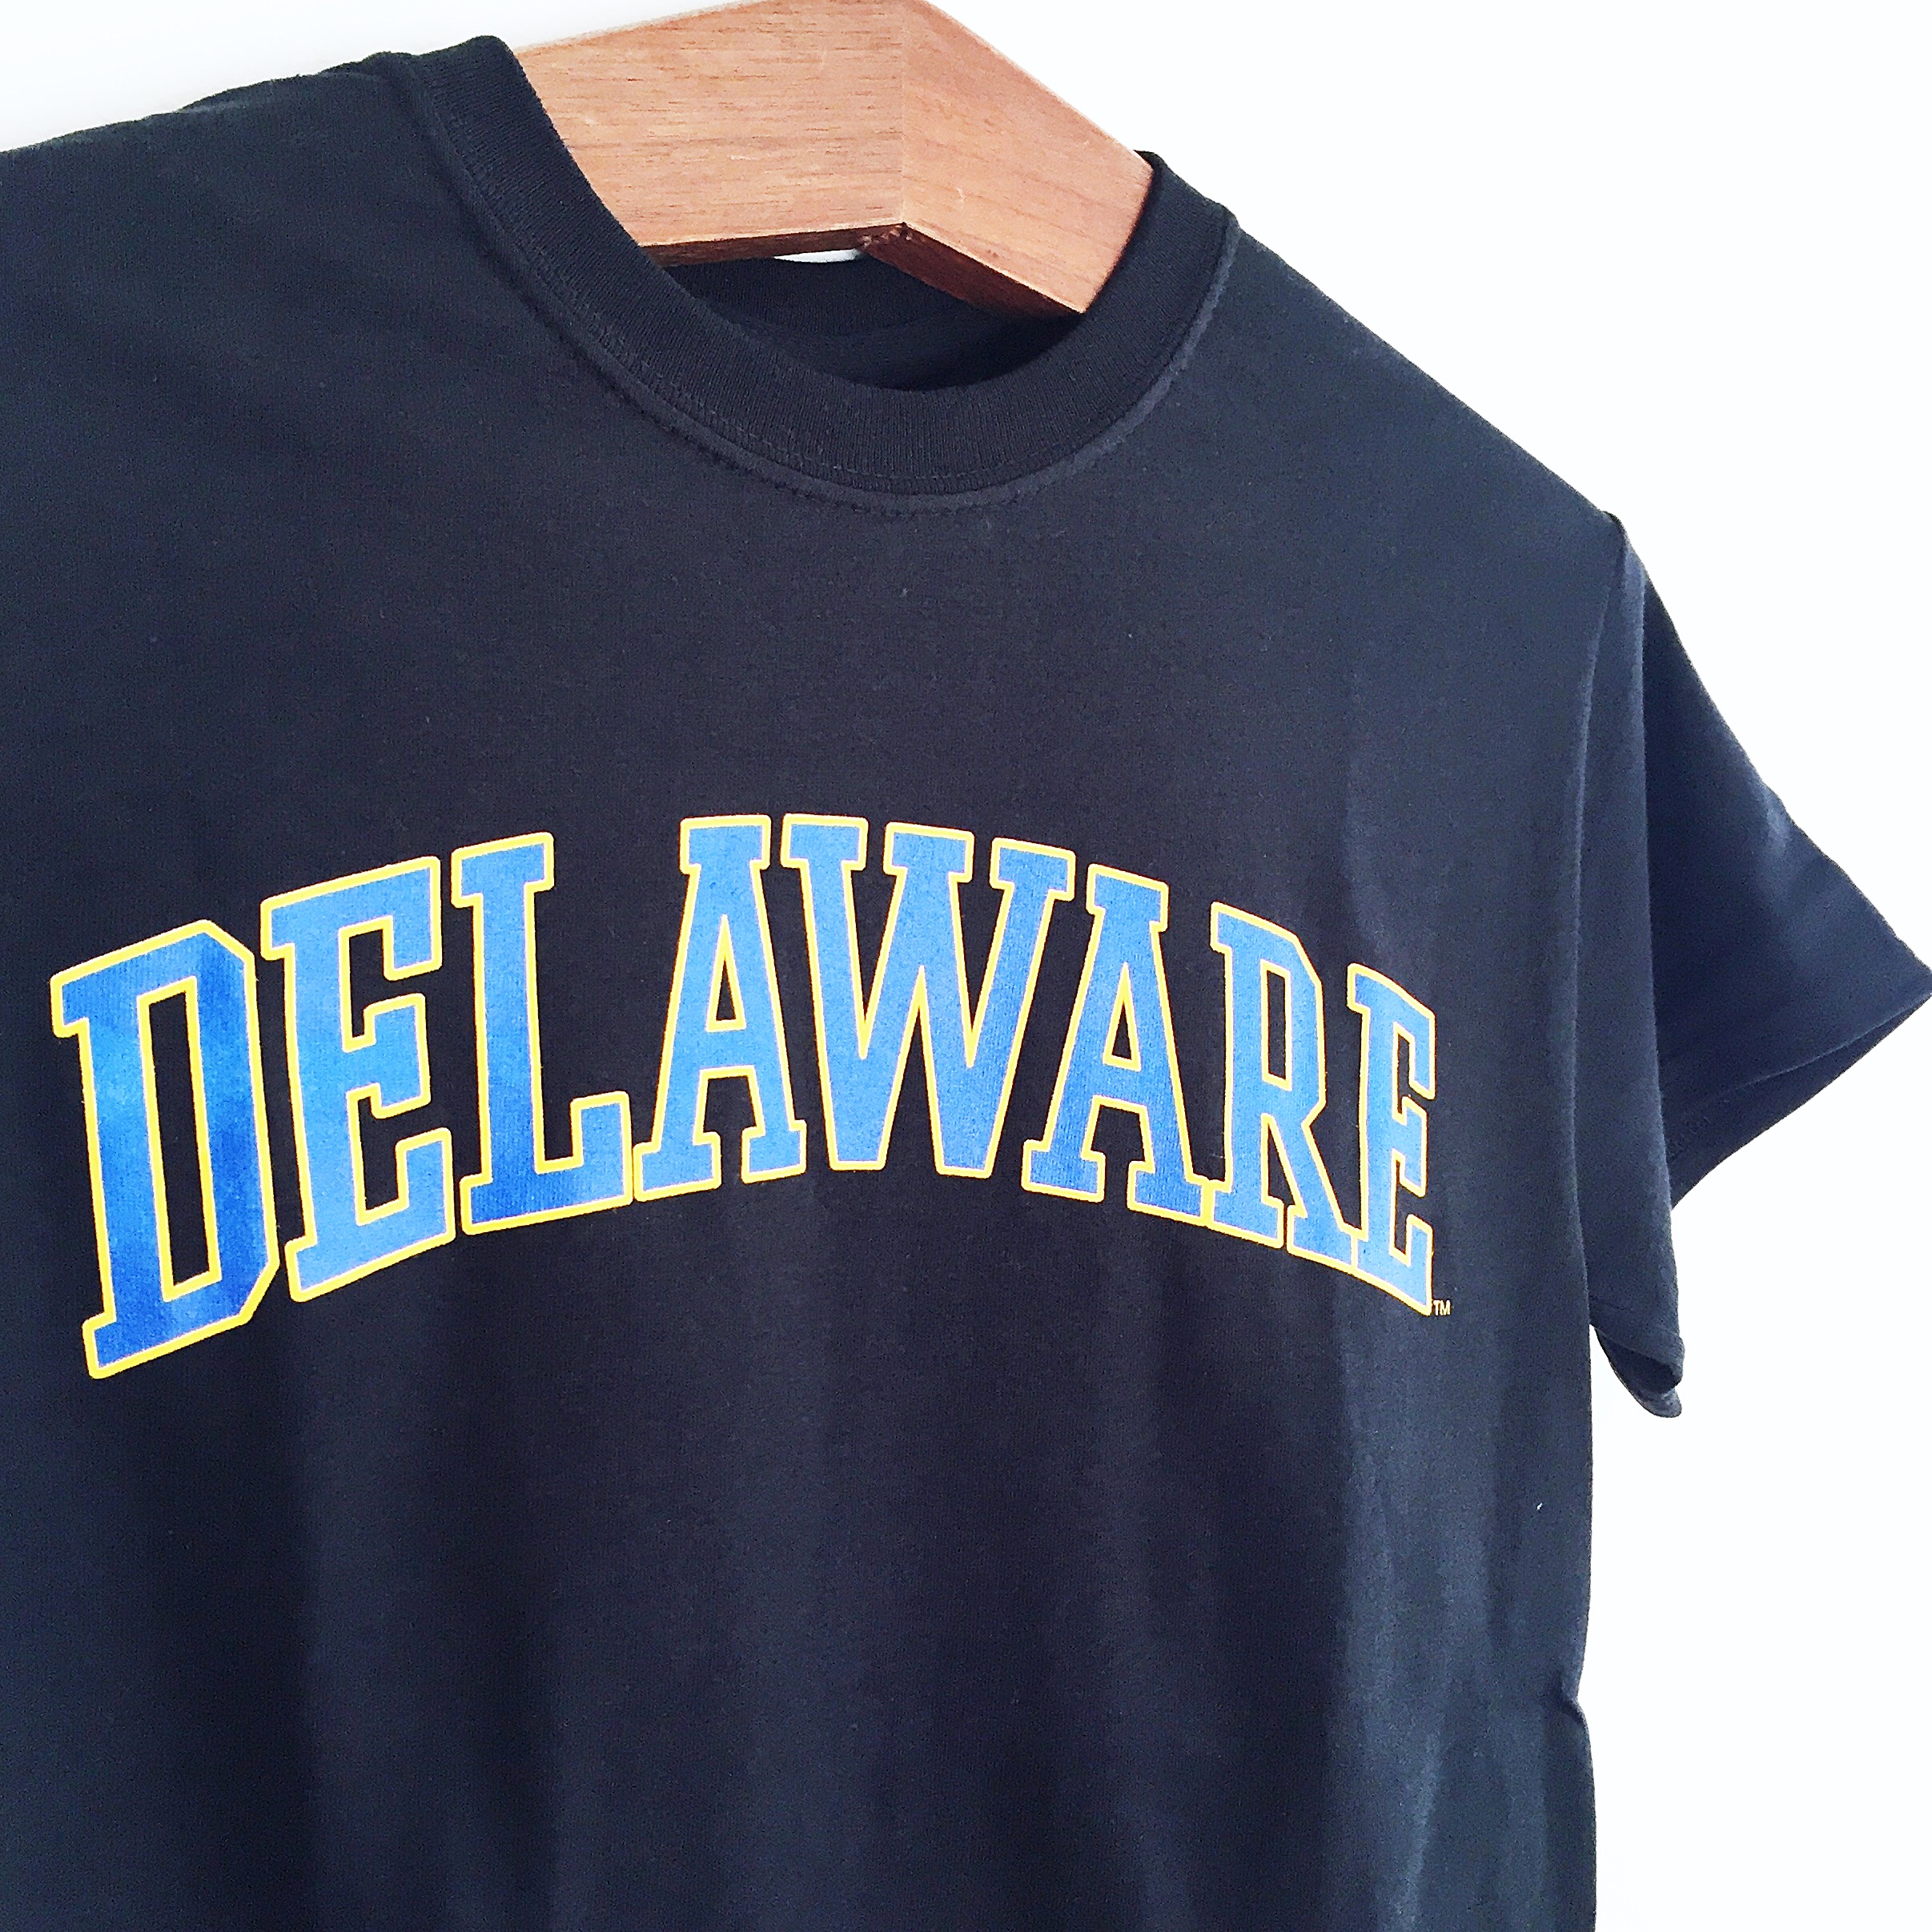 University of Delaware Arched Delaware T-shirt – Black – National 5 and 10